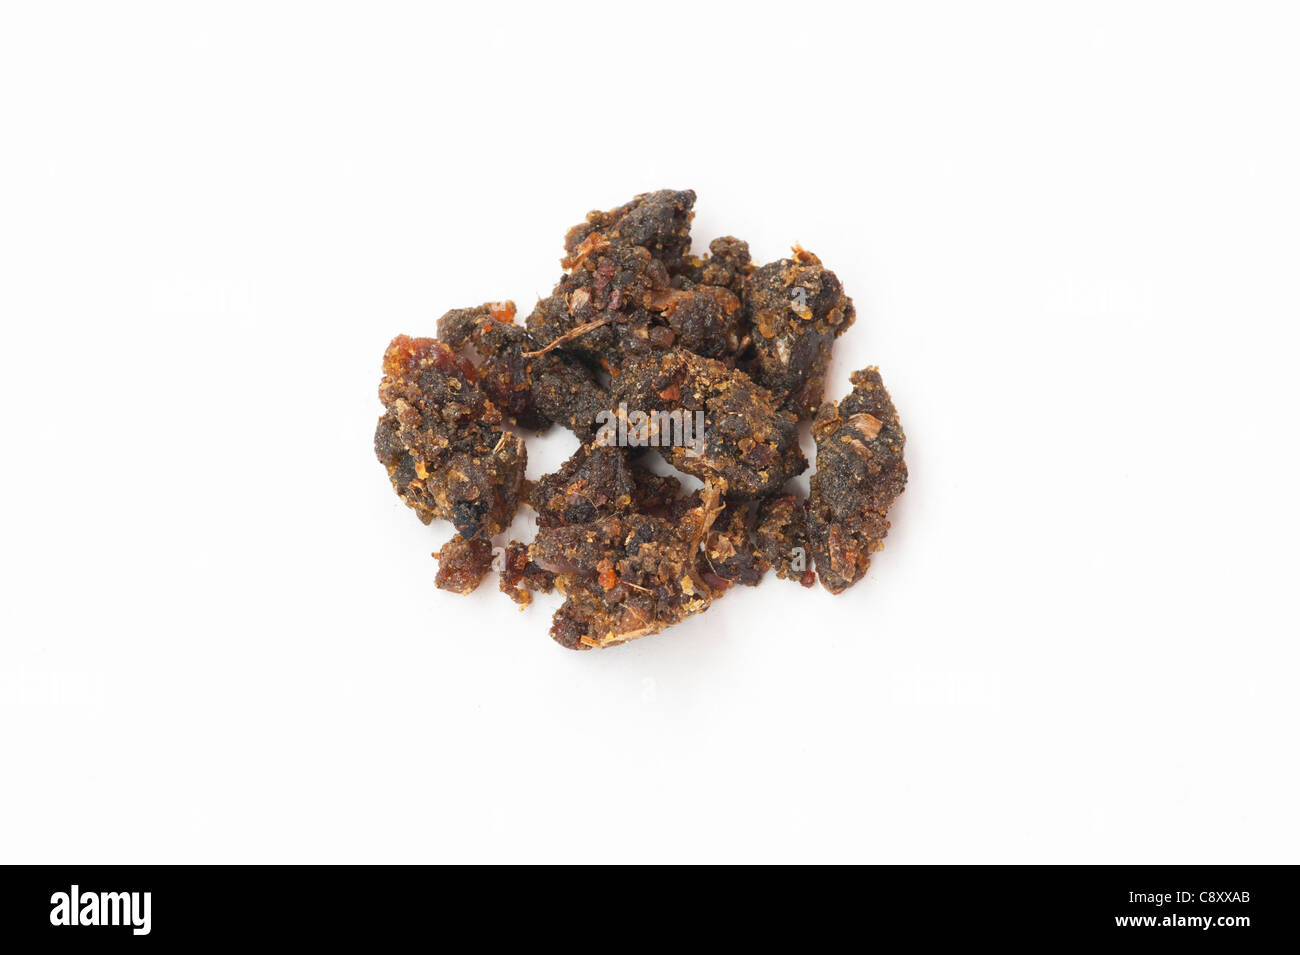 Guggal Resin on white background Stock Photo